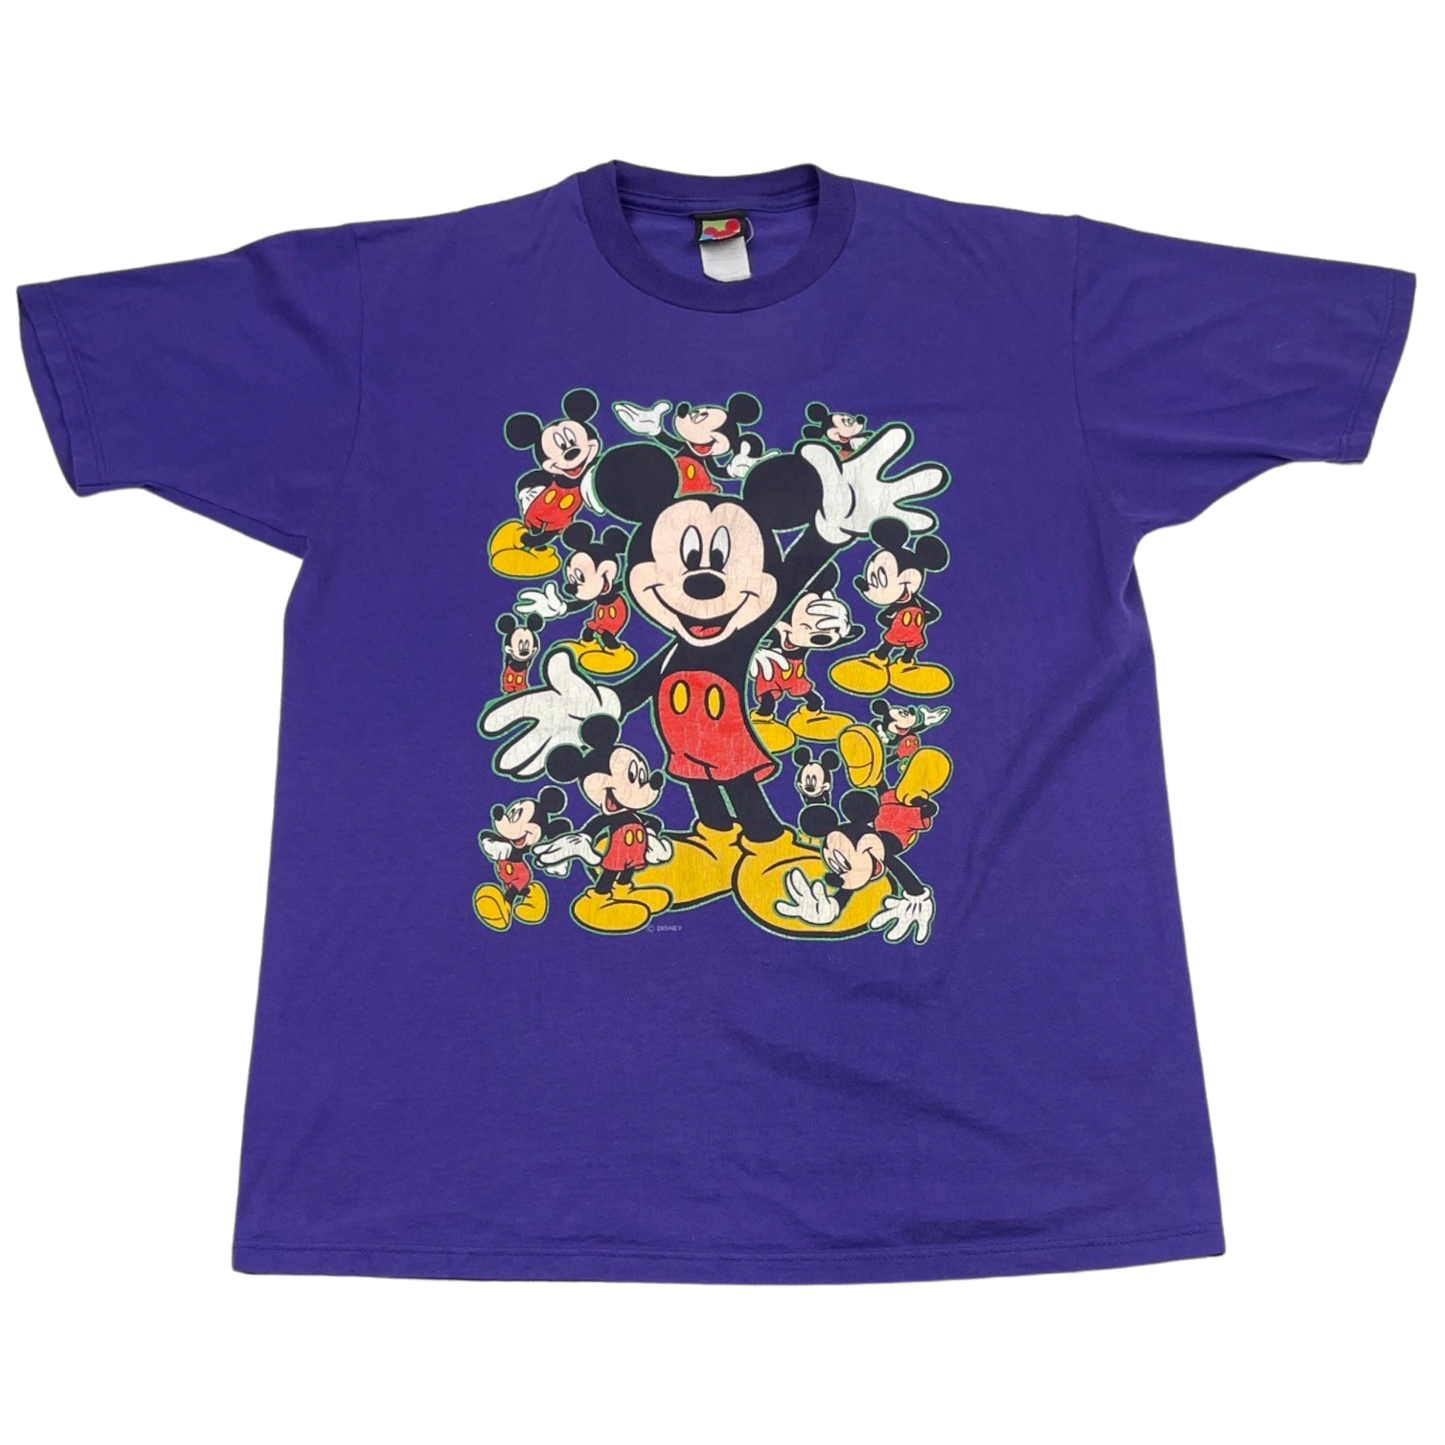 '90s Mickey Mouse Tee